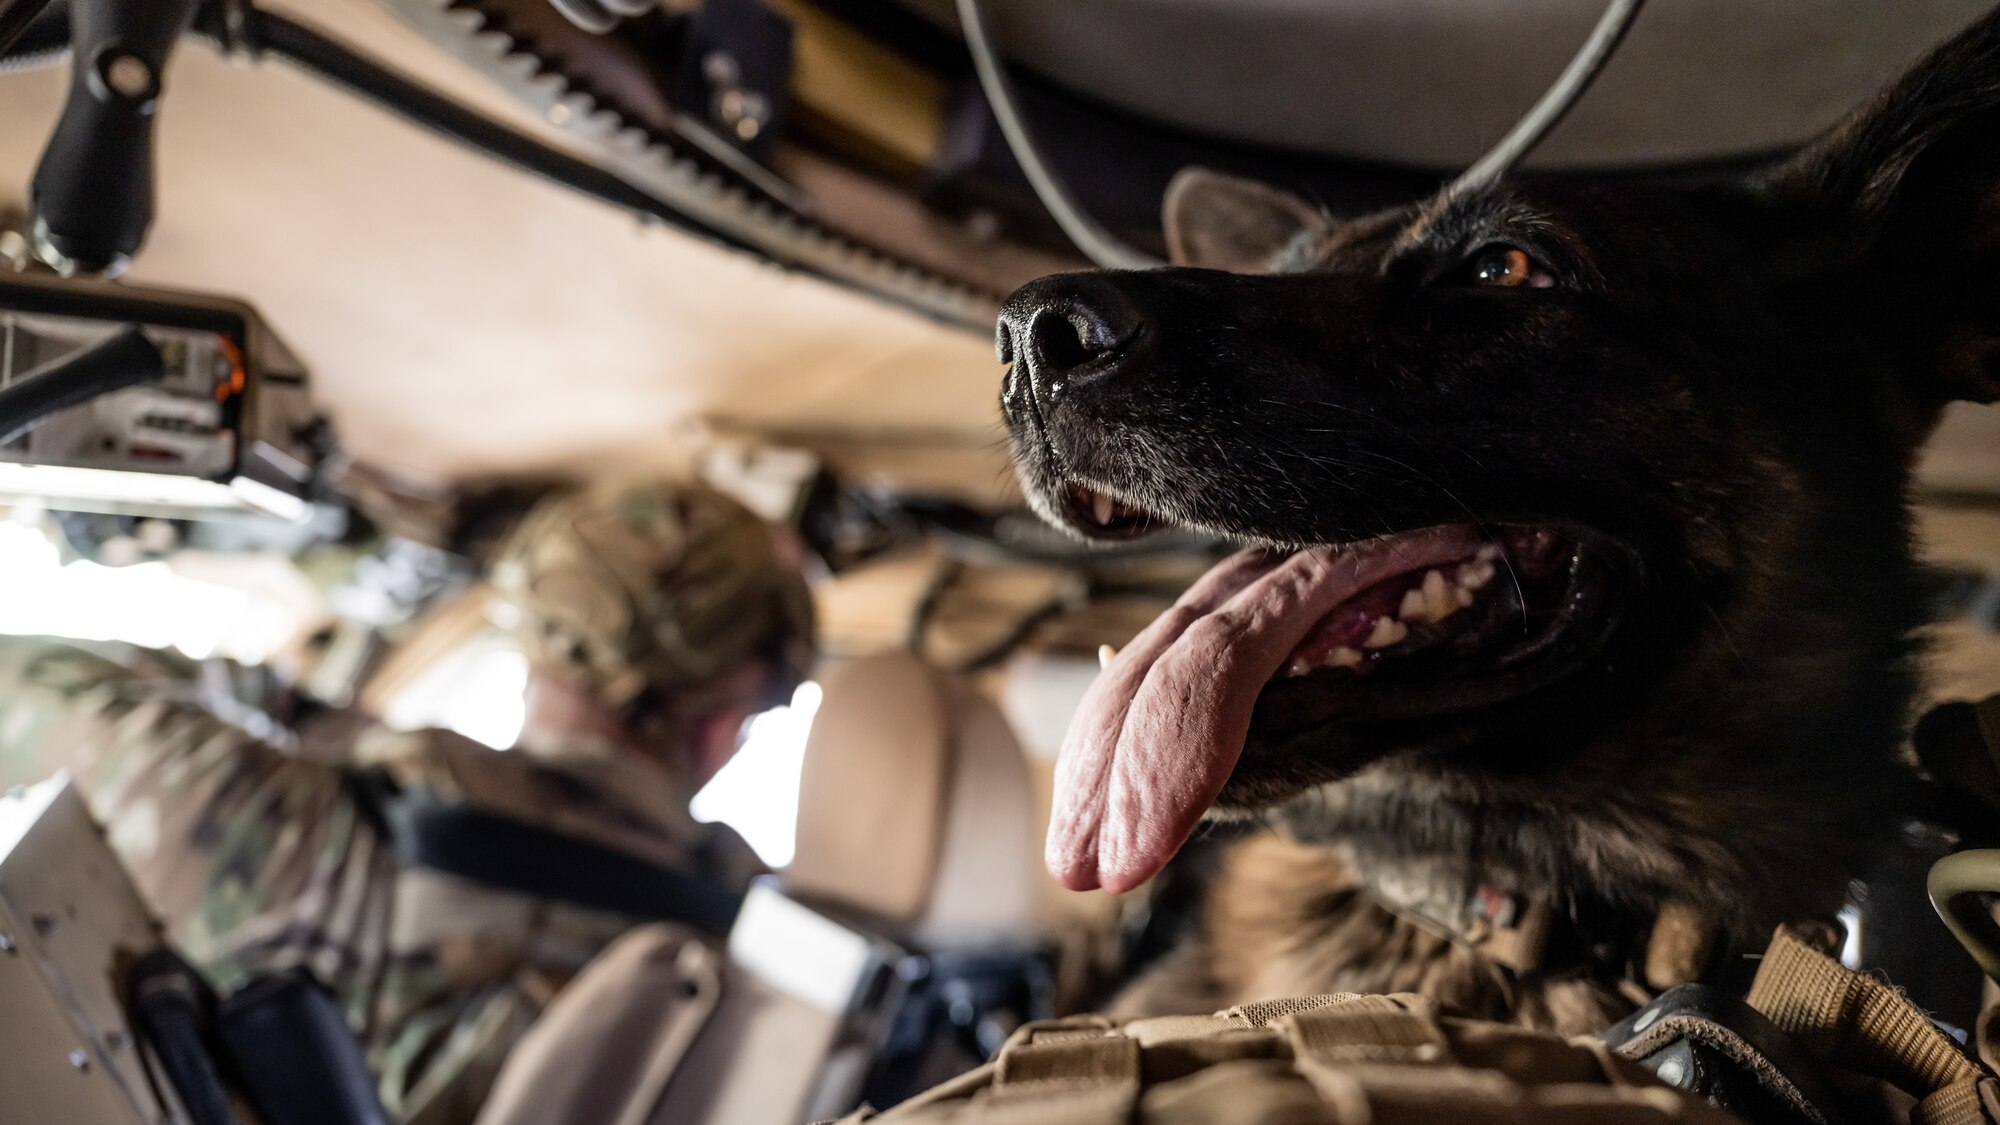 U.S. Air Force military working dog Lucky, from the 386th Expeditionary Security Forces Squadron, takes a ride inside a Mine Resistant Ambush Protected All-Terrain Vehicle (M-ATV) during vehicle familiarity training at Ali Al Salem Air Base, Kuwait, July 13, 2023. The M-ATV is designed to provide the same levels of protection as the larger and heavier vehicles, but with enhanced mobility in the region’s rough terrain. (U.S. Air Force photo by Staff Sgt. Kevin Long)